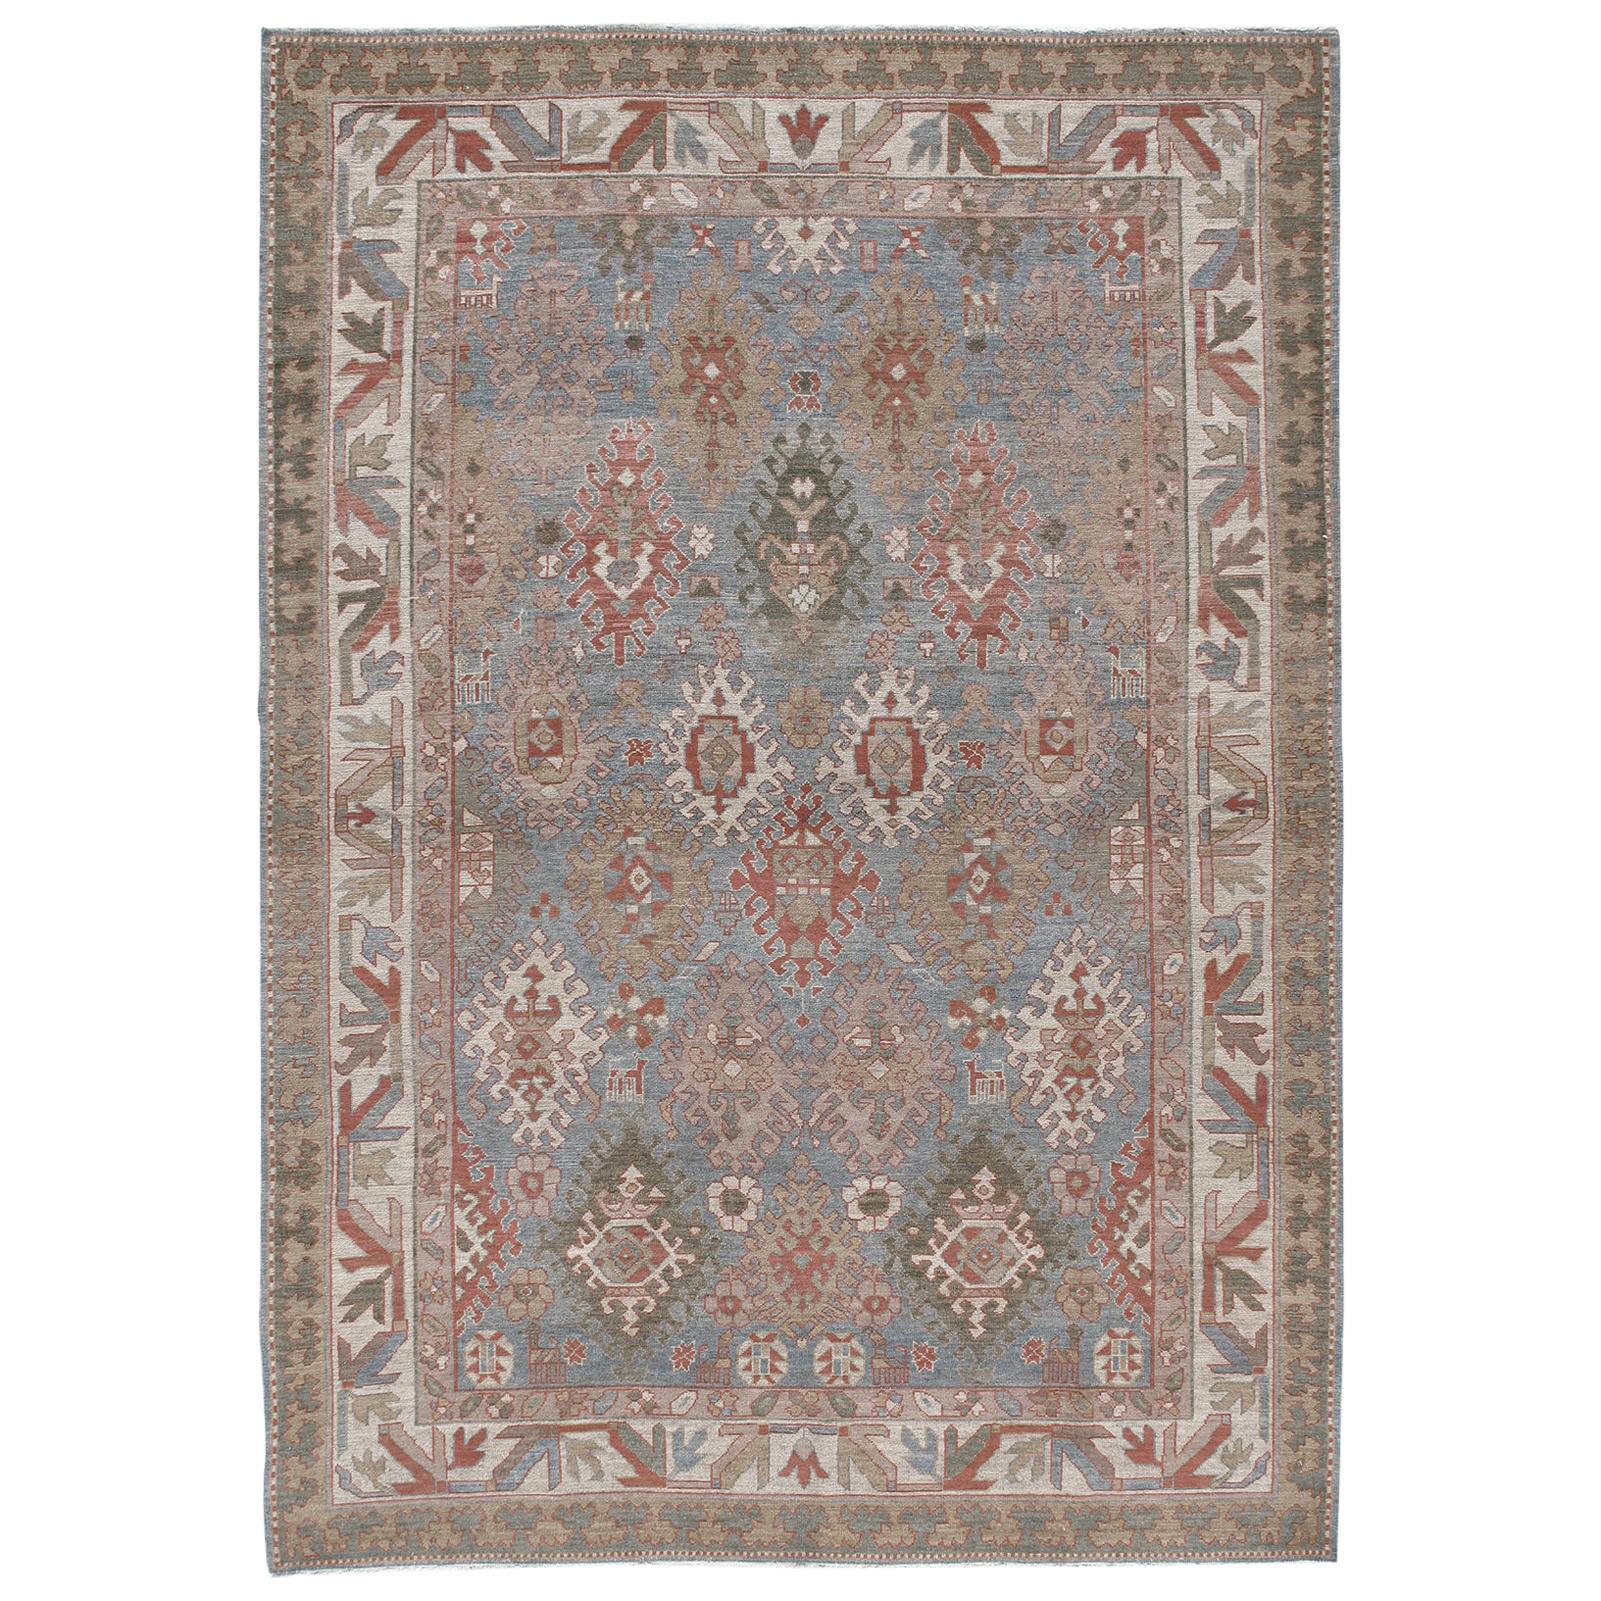 Persian Kurdish Hand Knotted Rug in Pale Blue, Camel and Ivory Colors